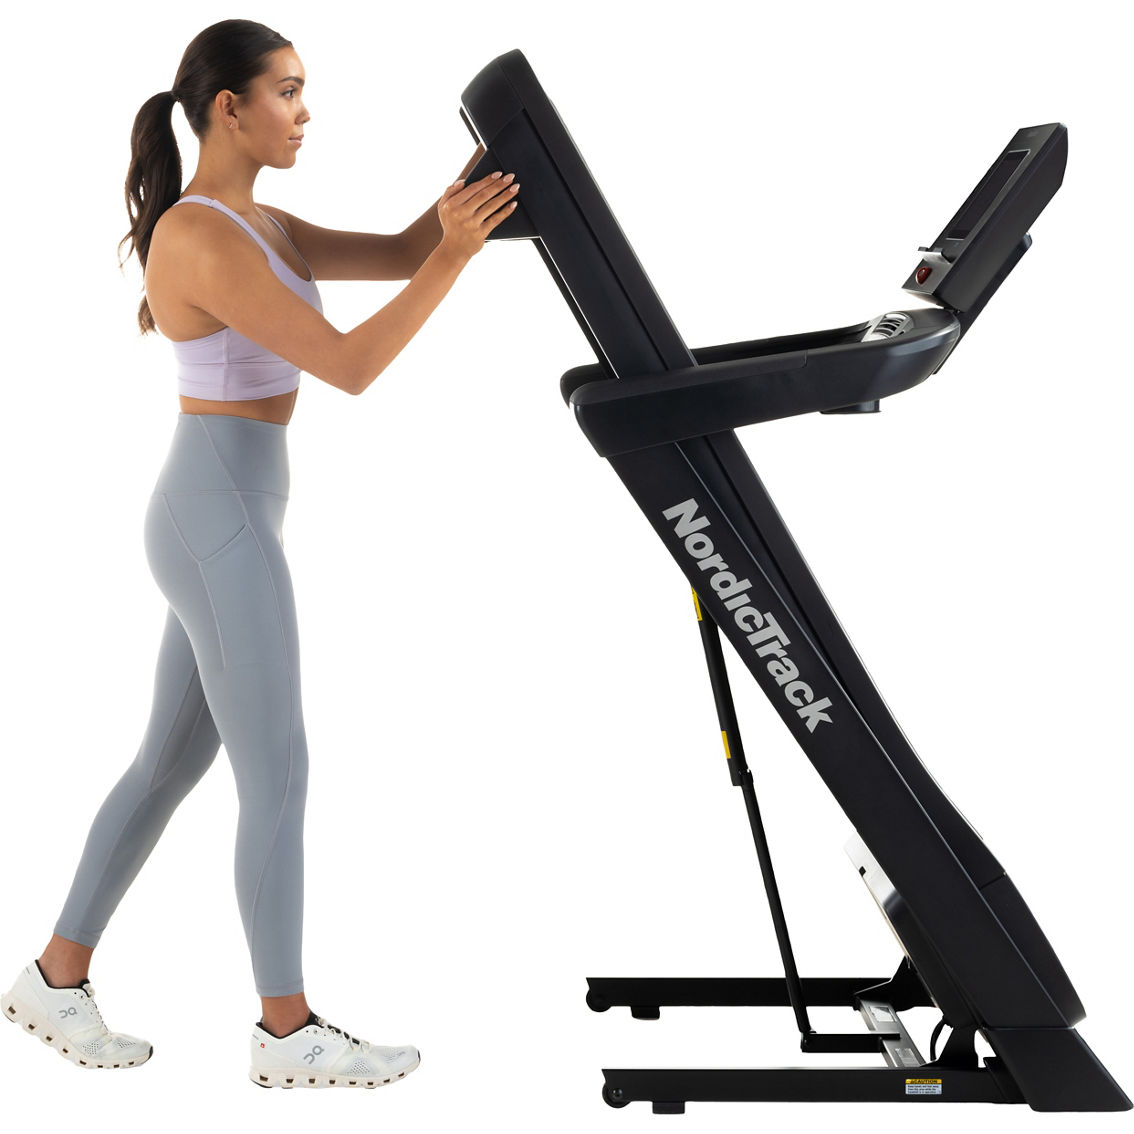 NordicTrack EXP 10i Treadmill - Image 4 of 4